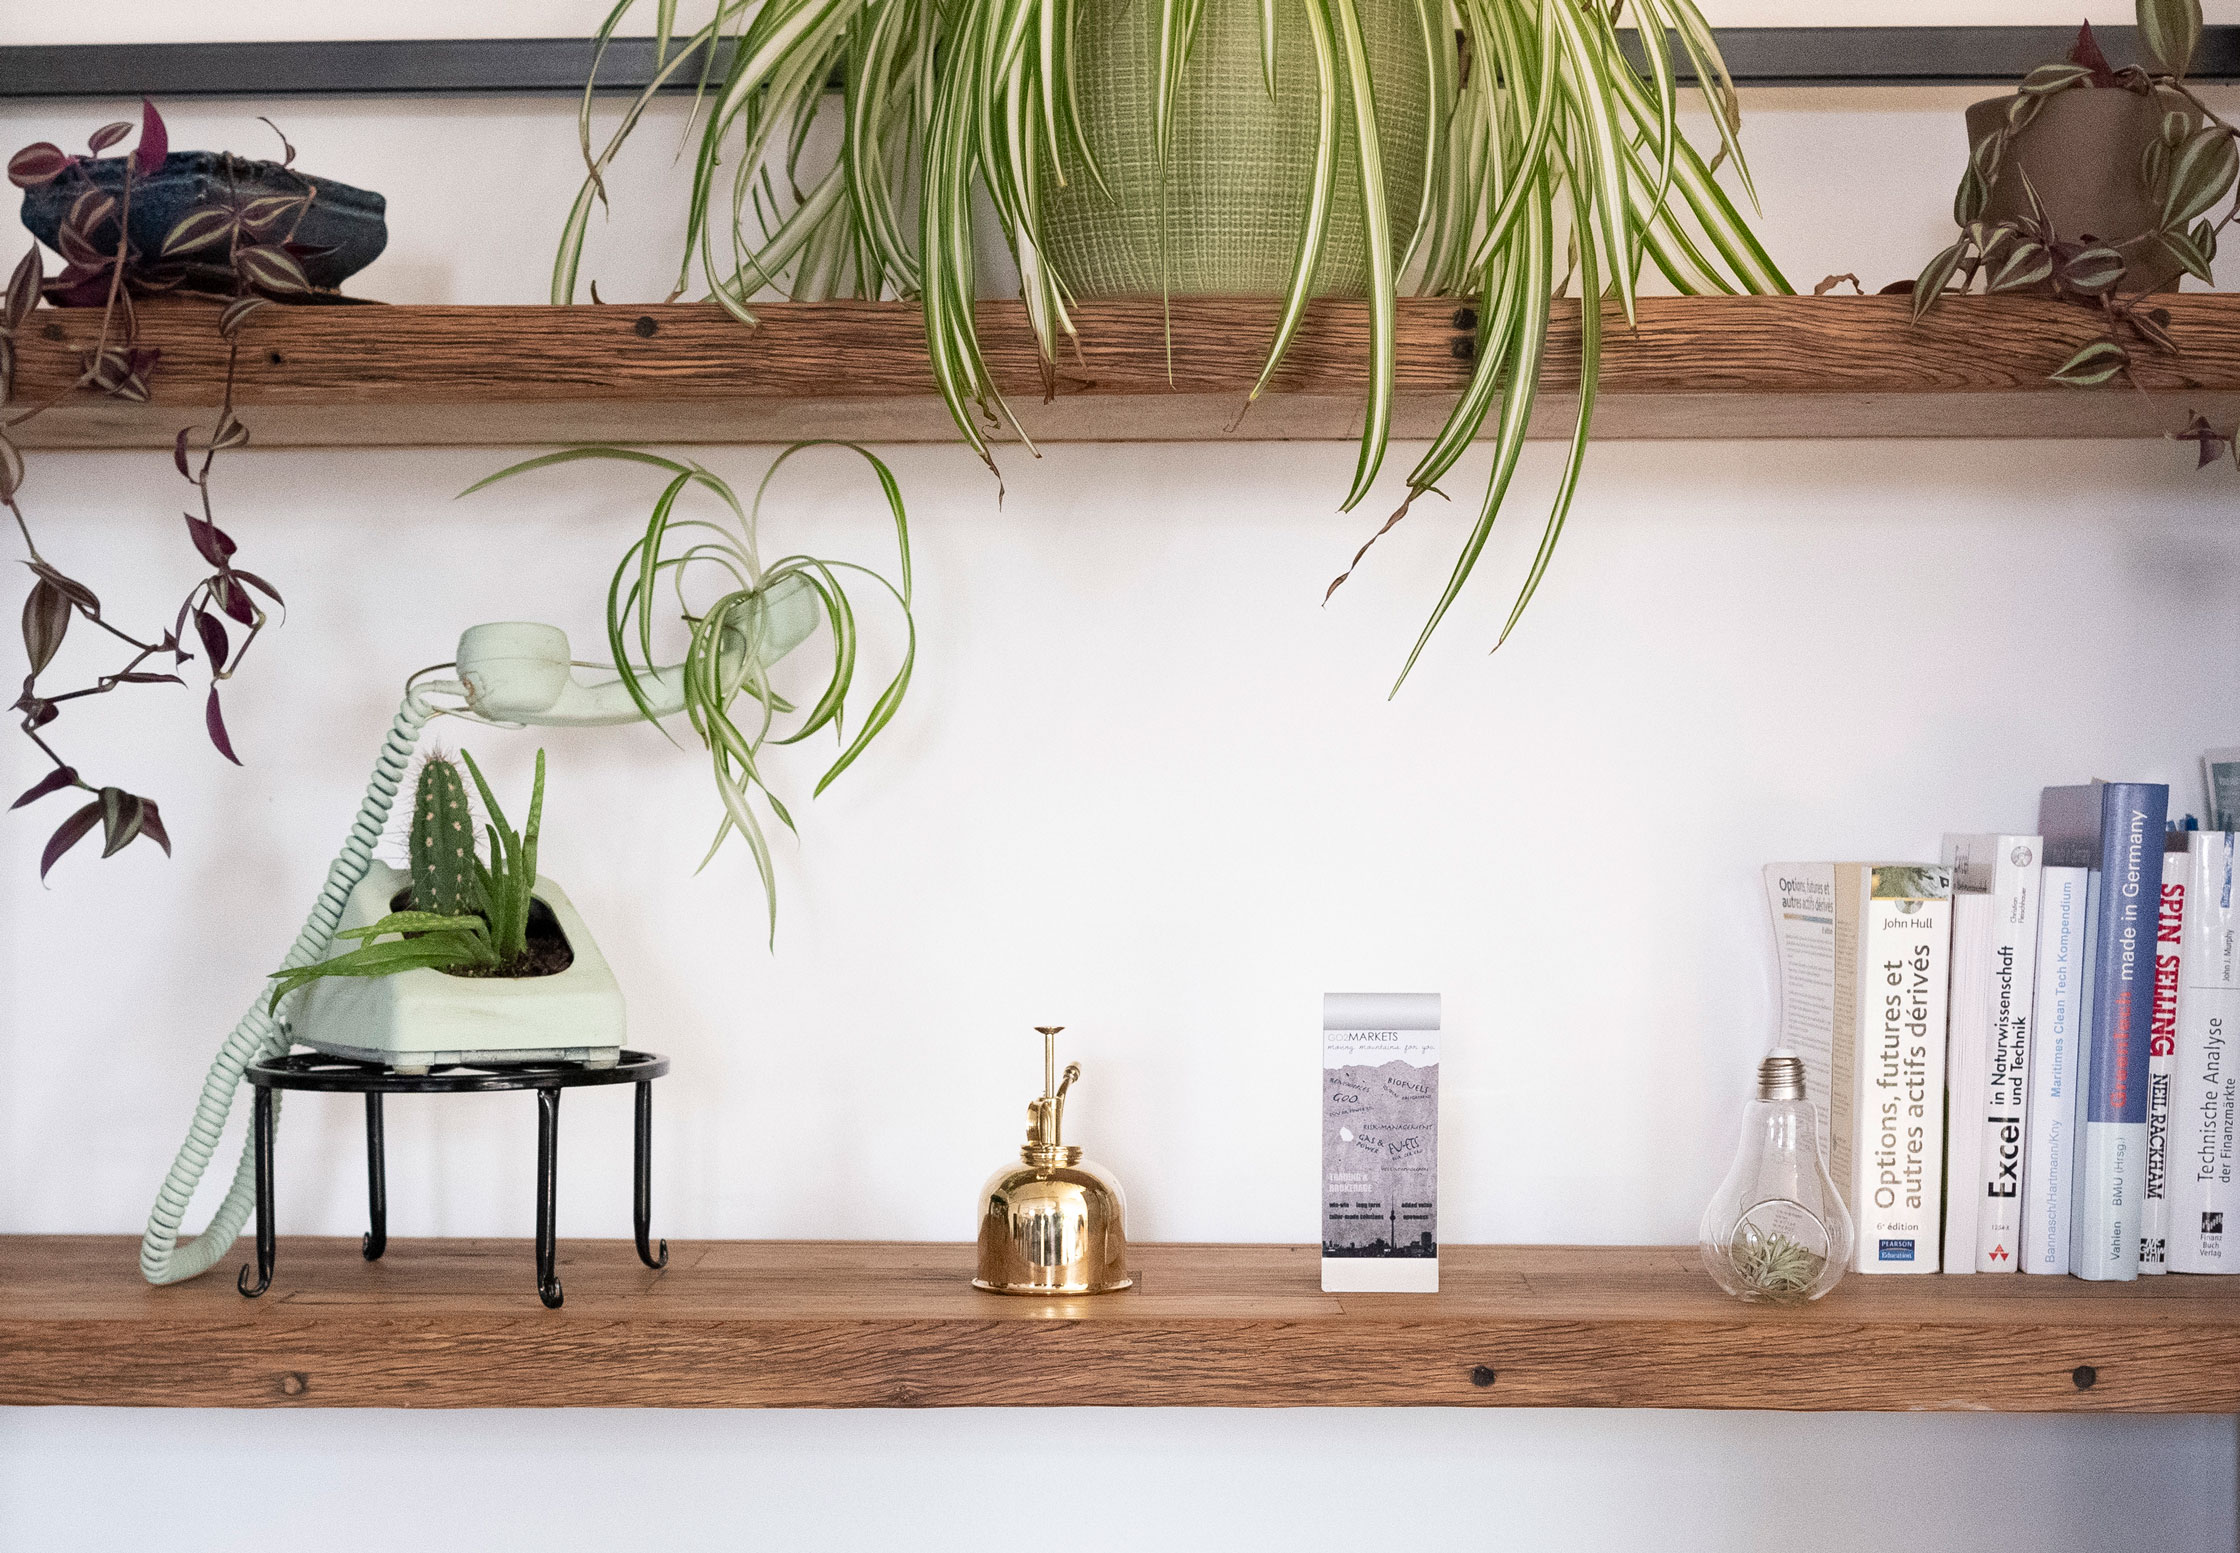 A phone, plants, books, and small decorations on a wooden shelf